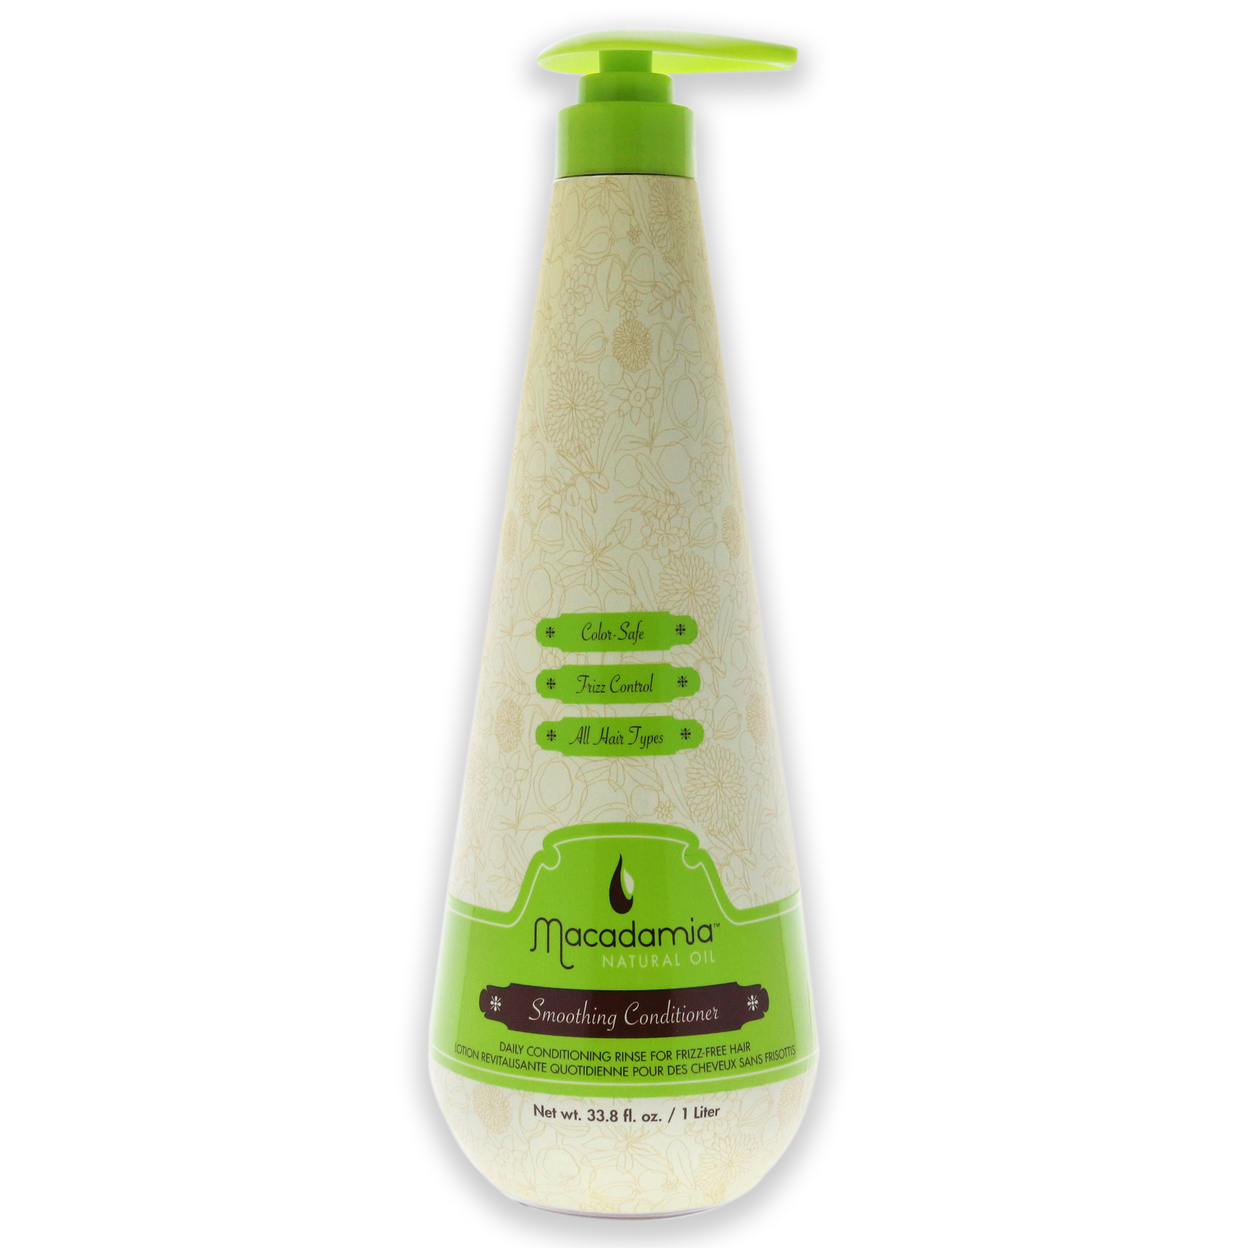 Macadamia Oil Unisex HAIRCARE Natural Oil Smoothing Conditioner 33.8 Oz